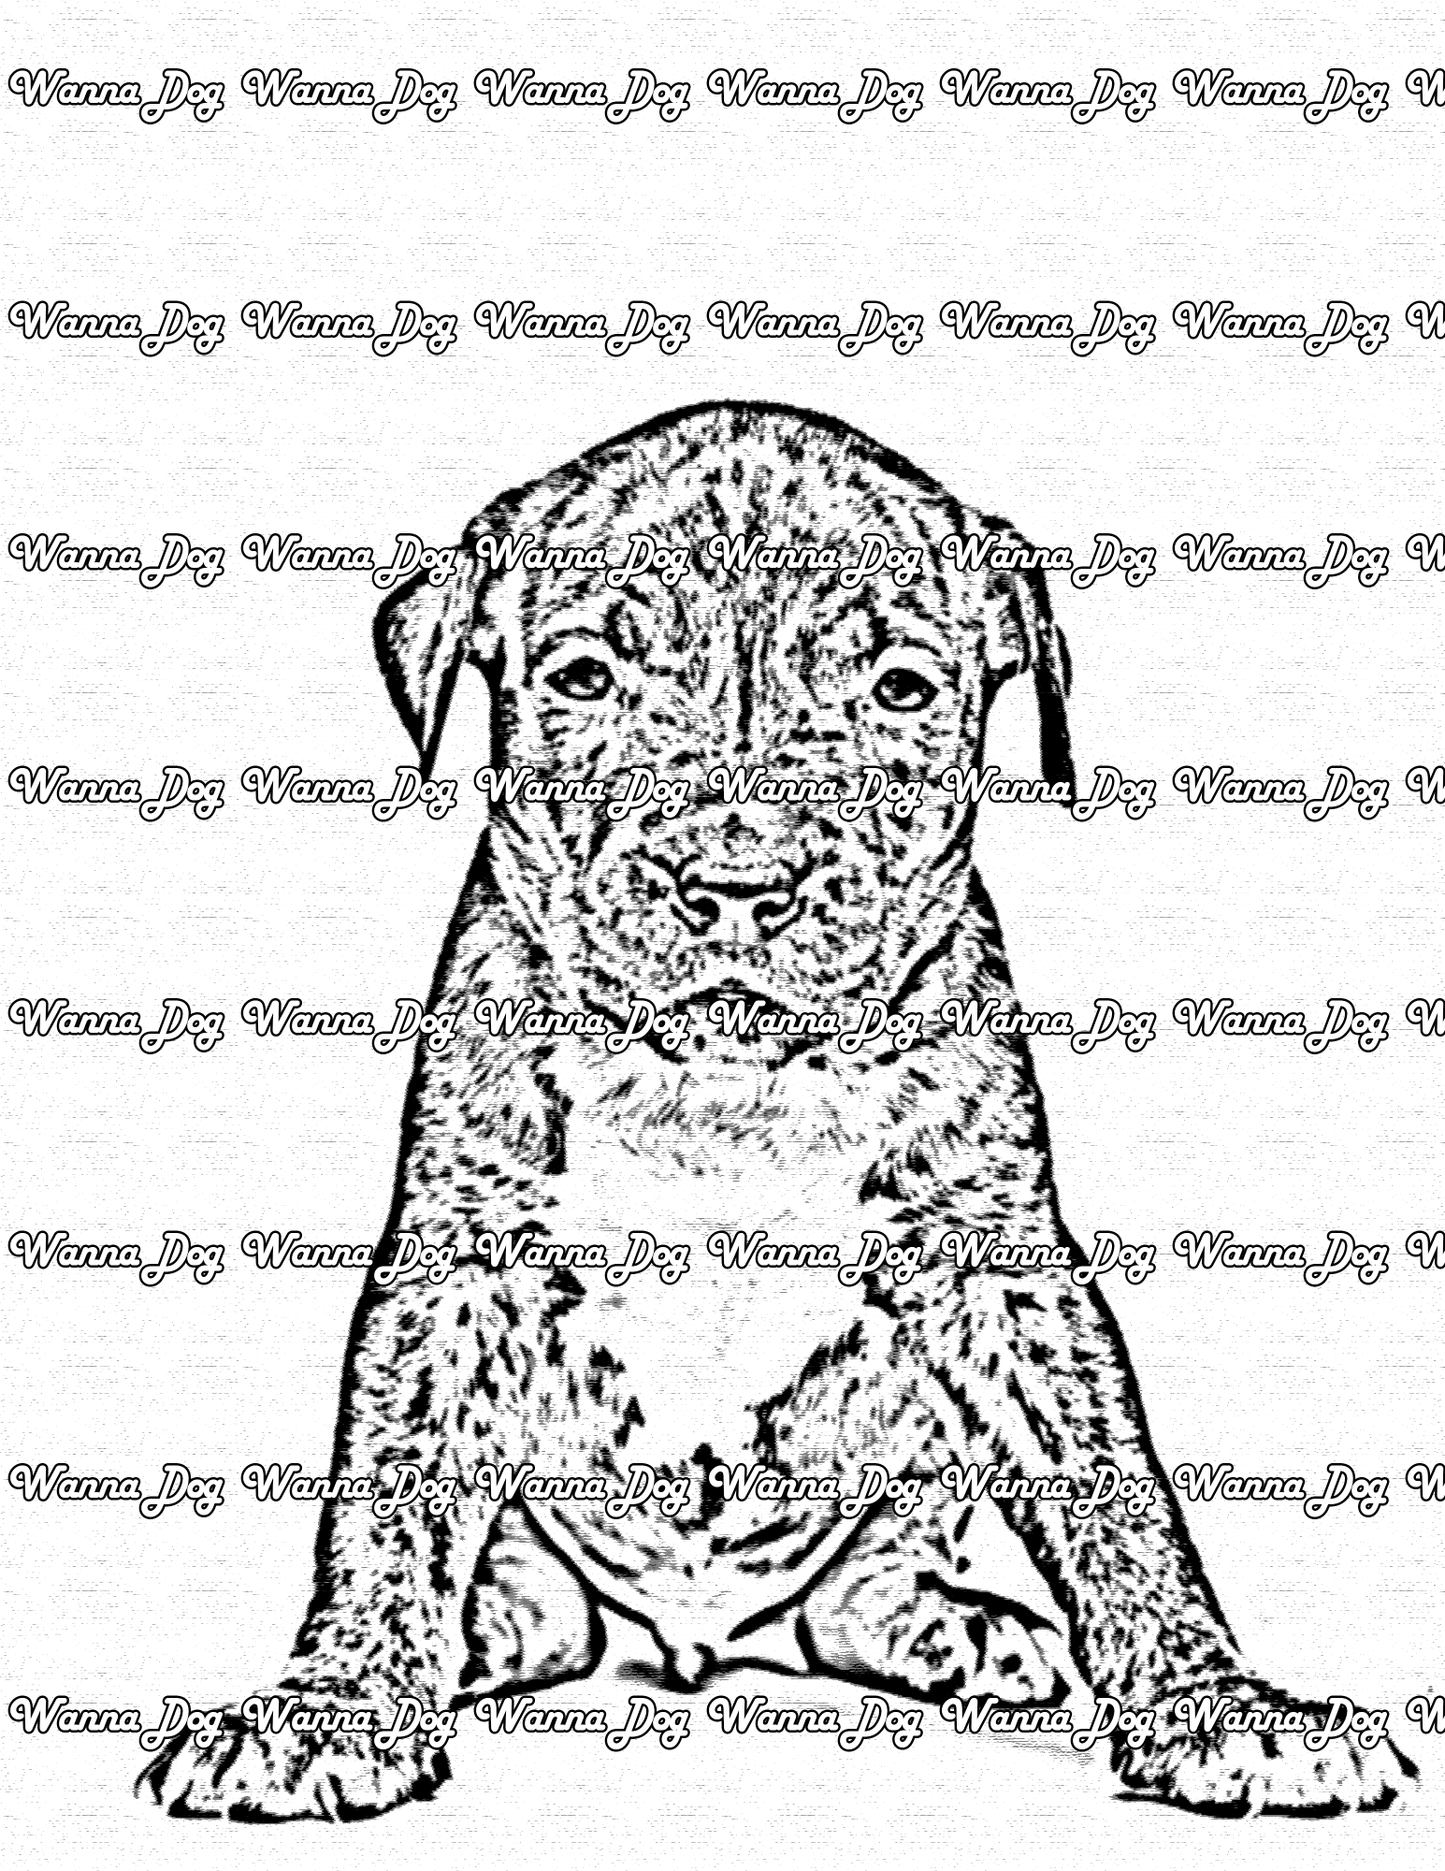 Pitbull Puppy Coloring Page of a Pitbull Puppy kneeling